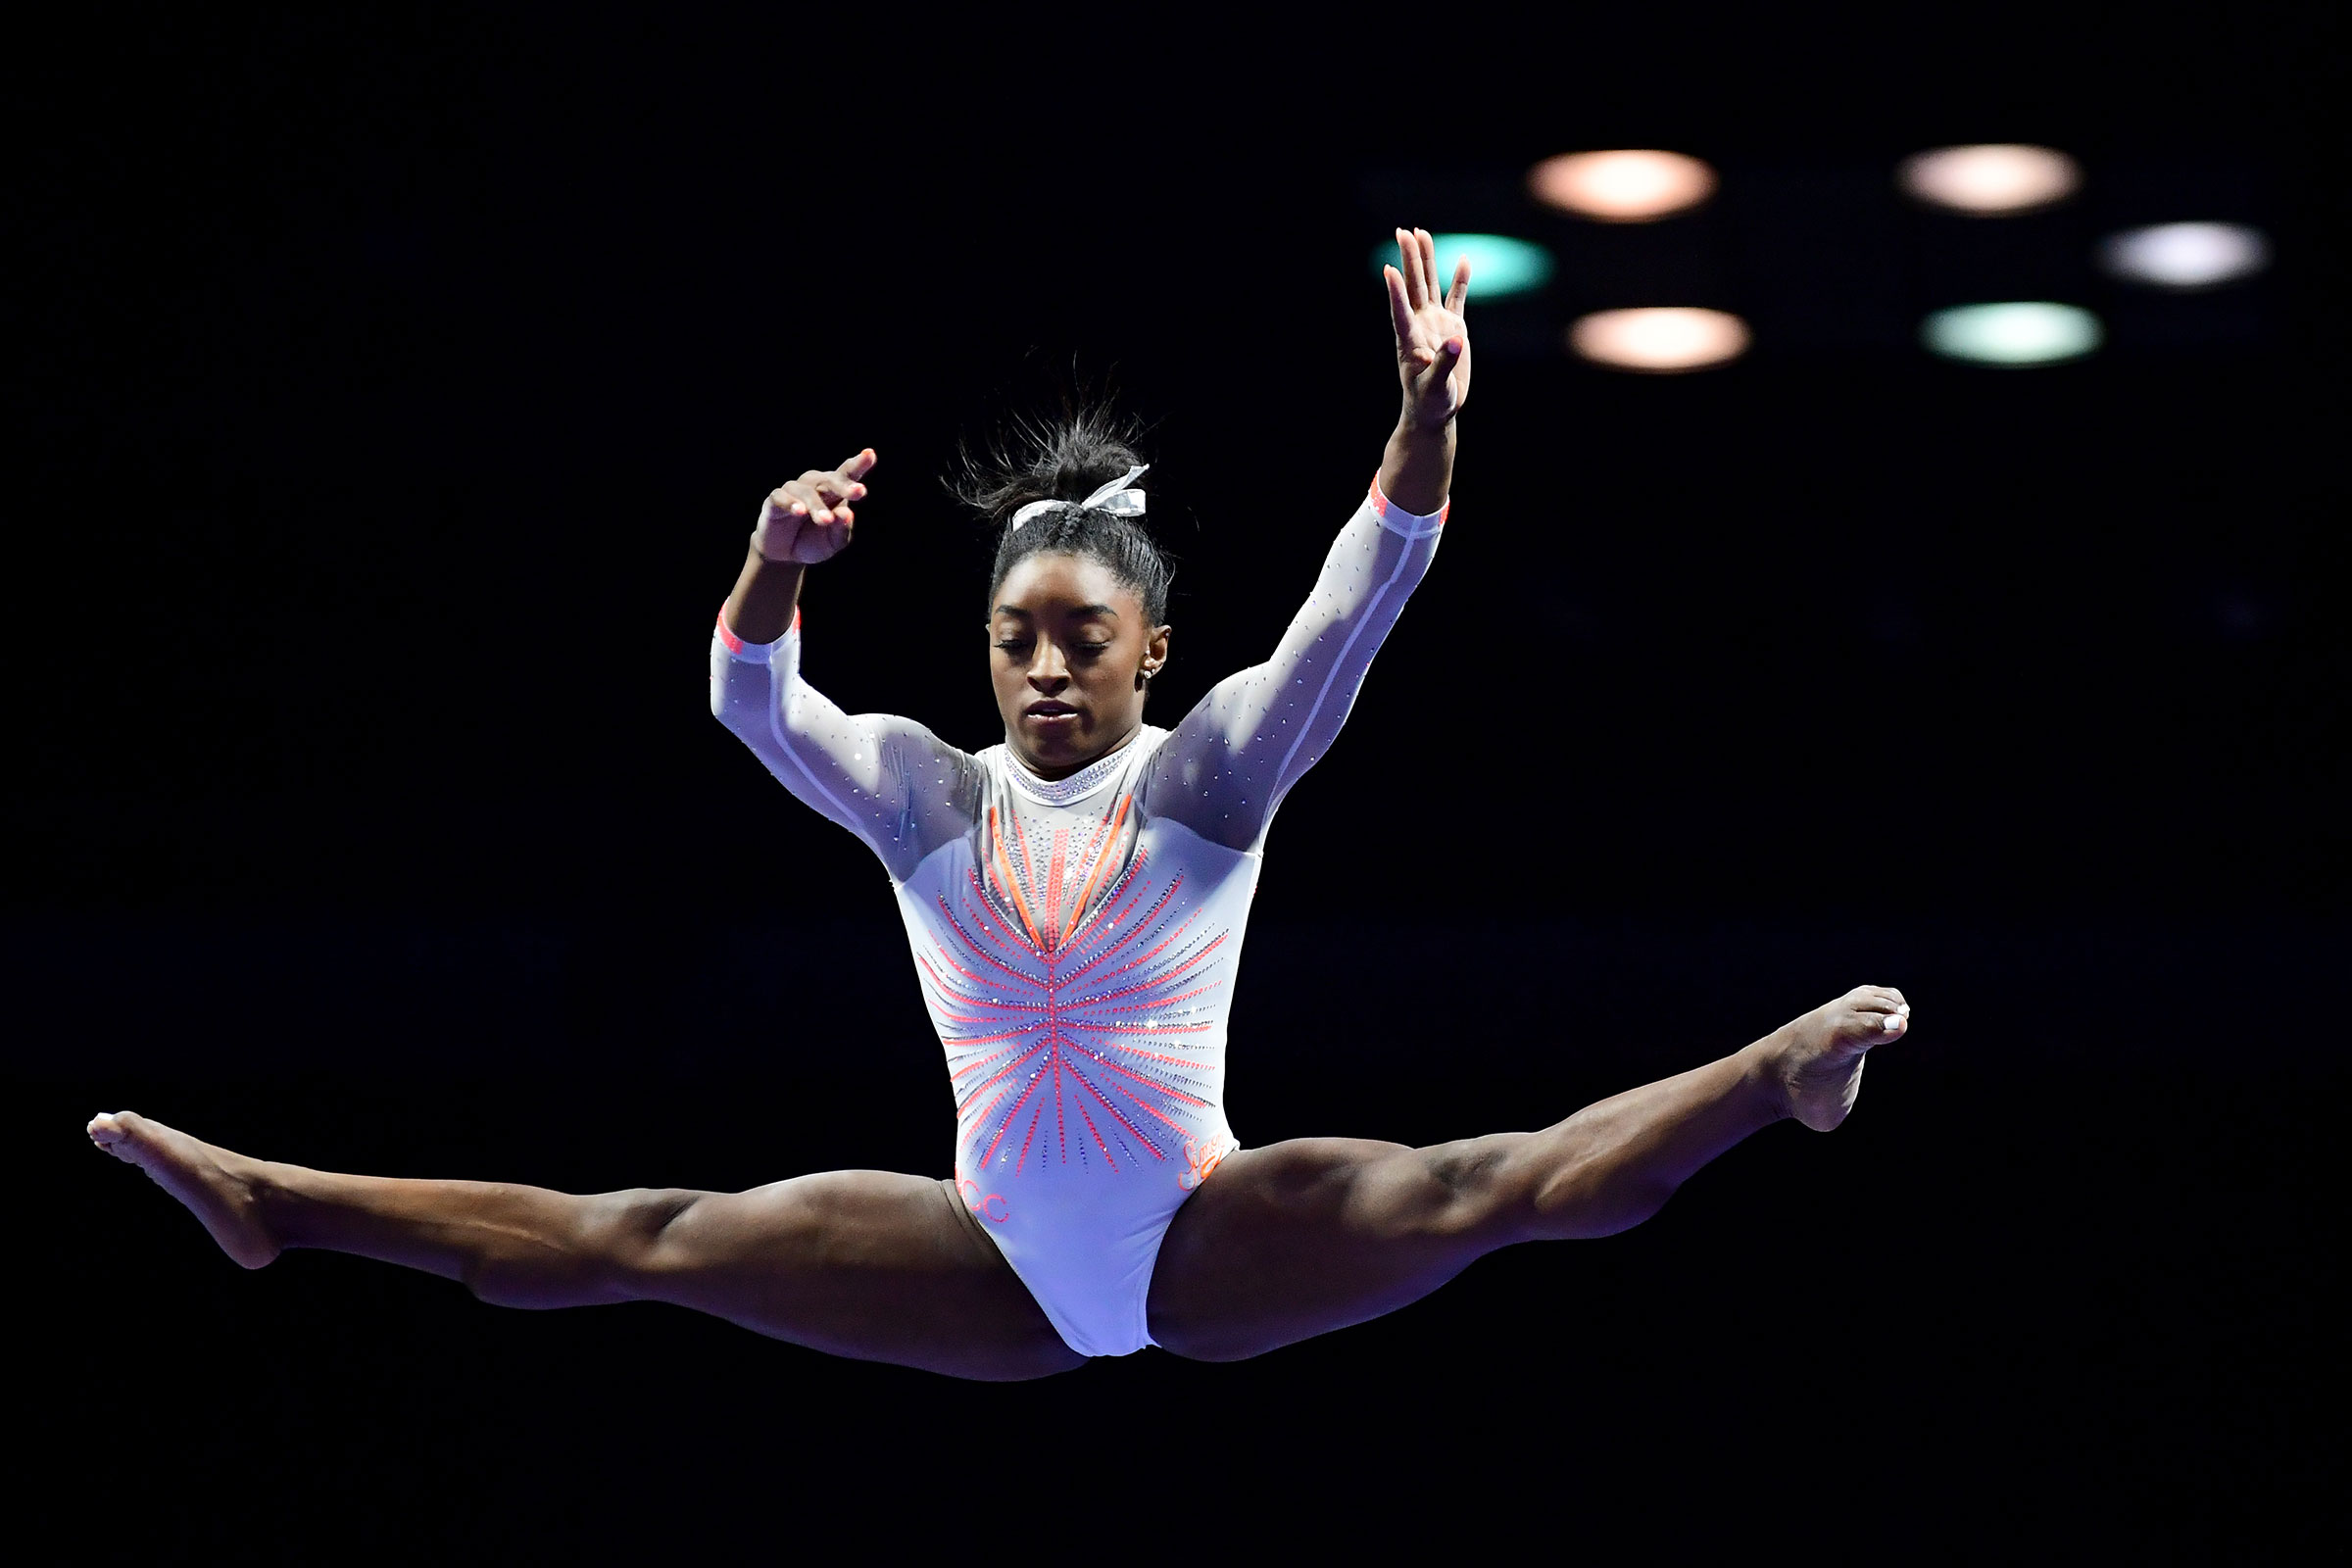 Simone Biles competes on the beam during the 2021 GK U.S. Classic gymnastics competition on May 22, 2021 in Indianapolis, Indiana.